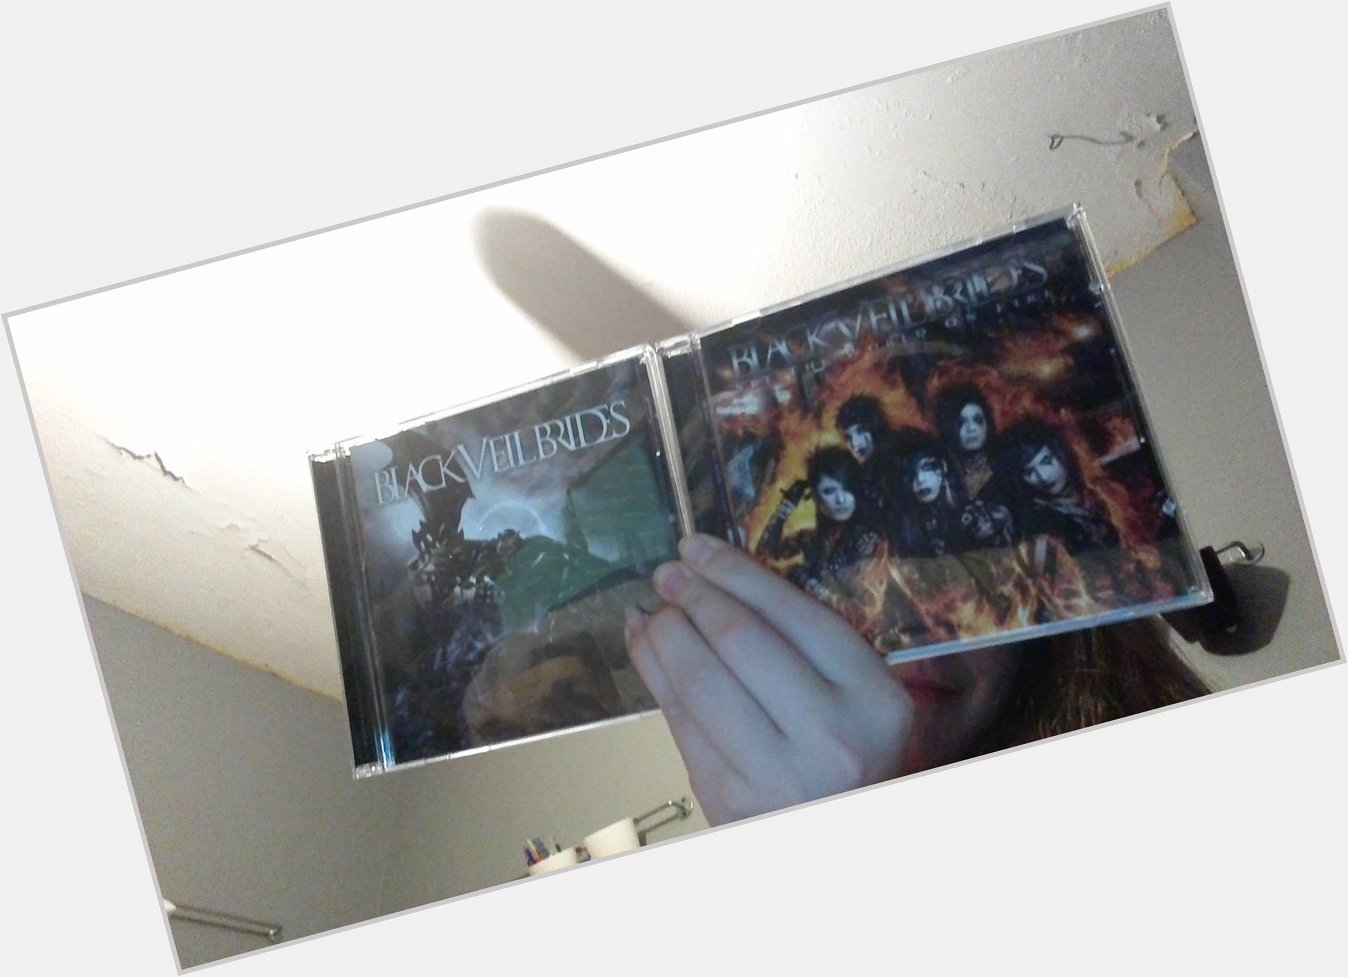  I got 2 albums today and it\s Andy Biersack\s birthday. Happy birthday Andy! 